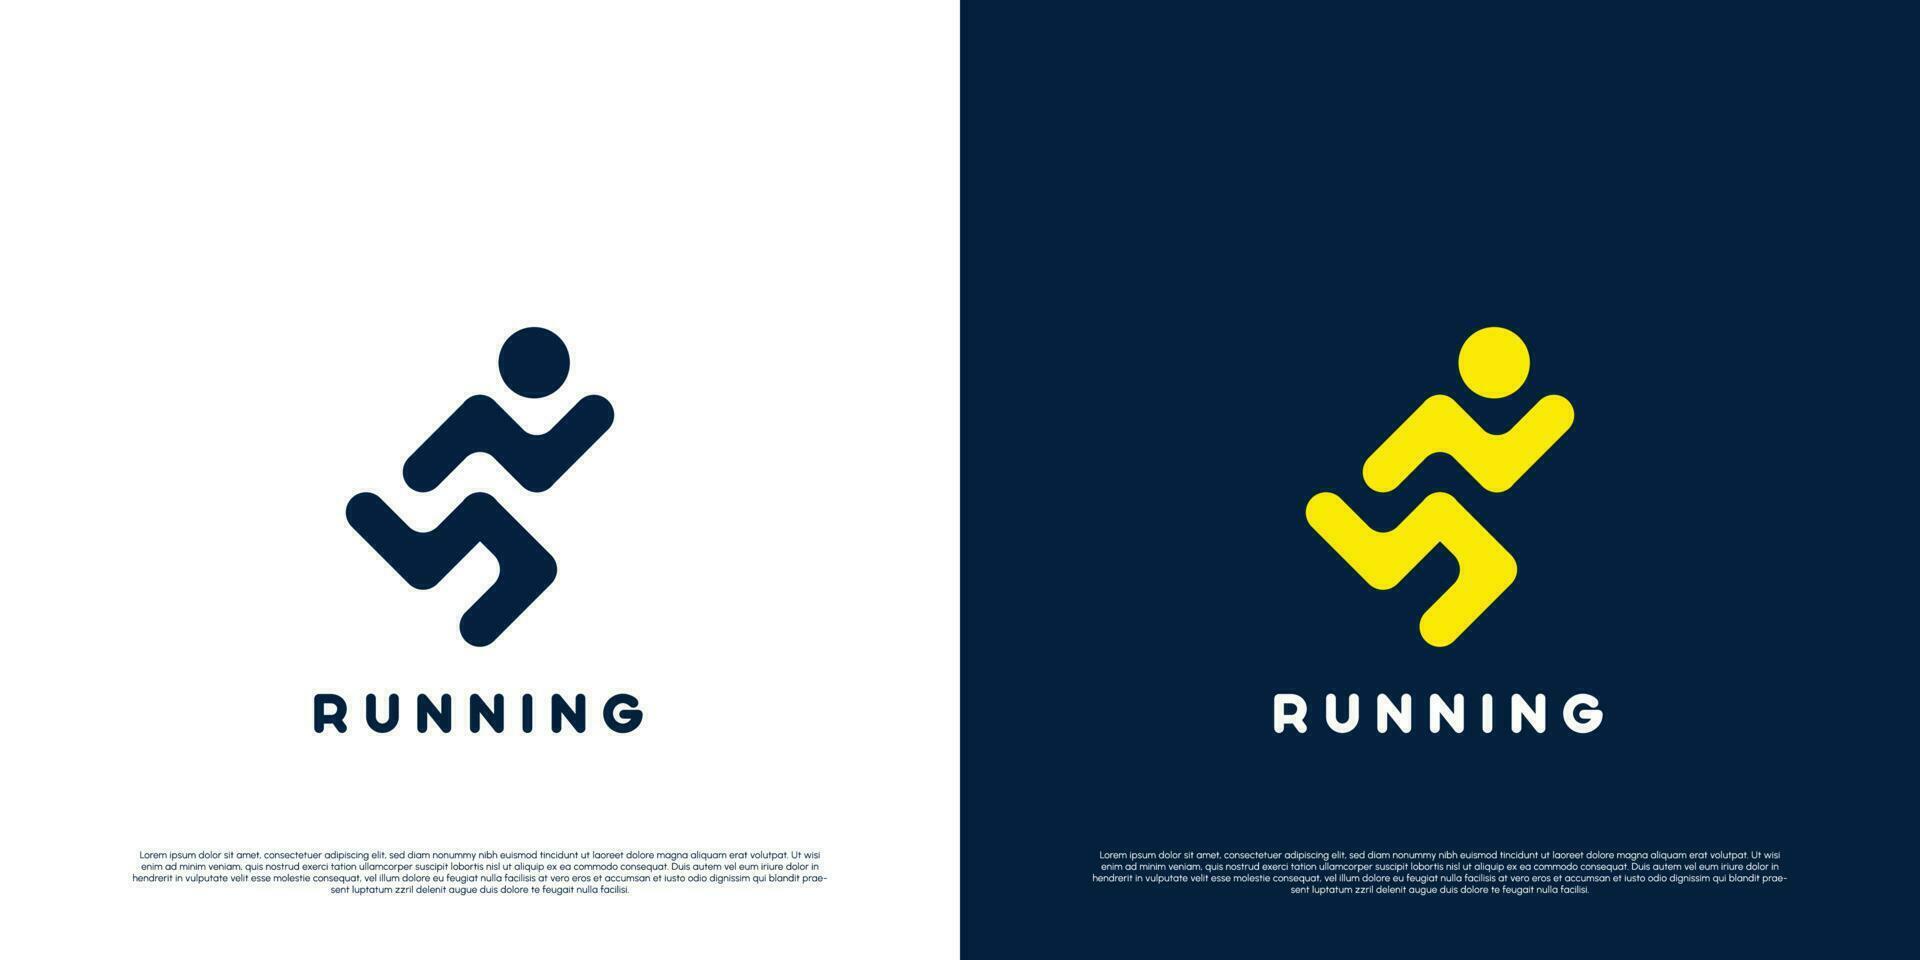 Running sport logo design illustration. Silhouettes of people running exercising. Simple flat design rounded shape. vector